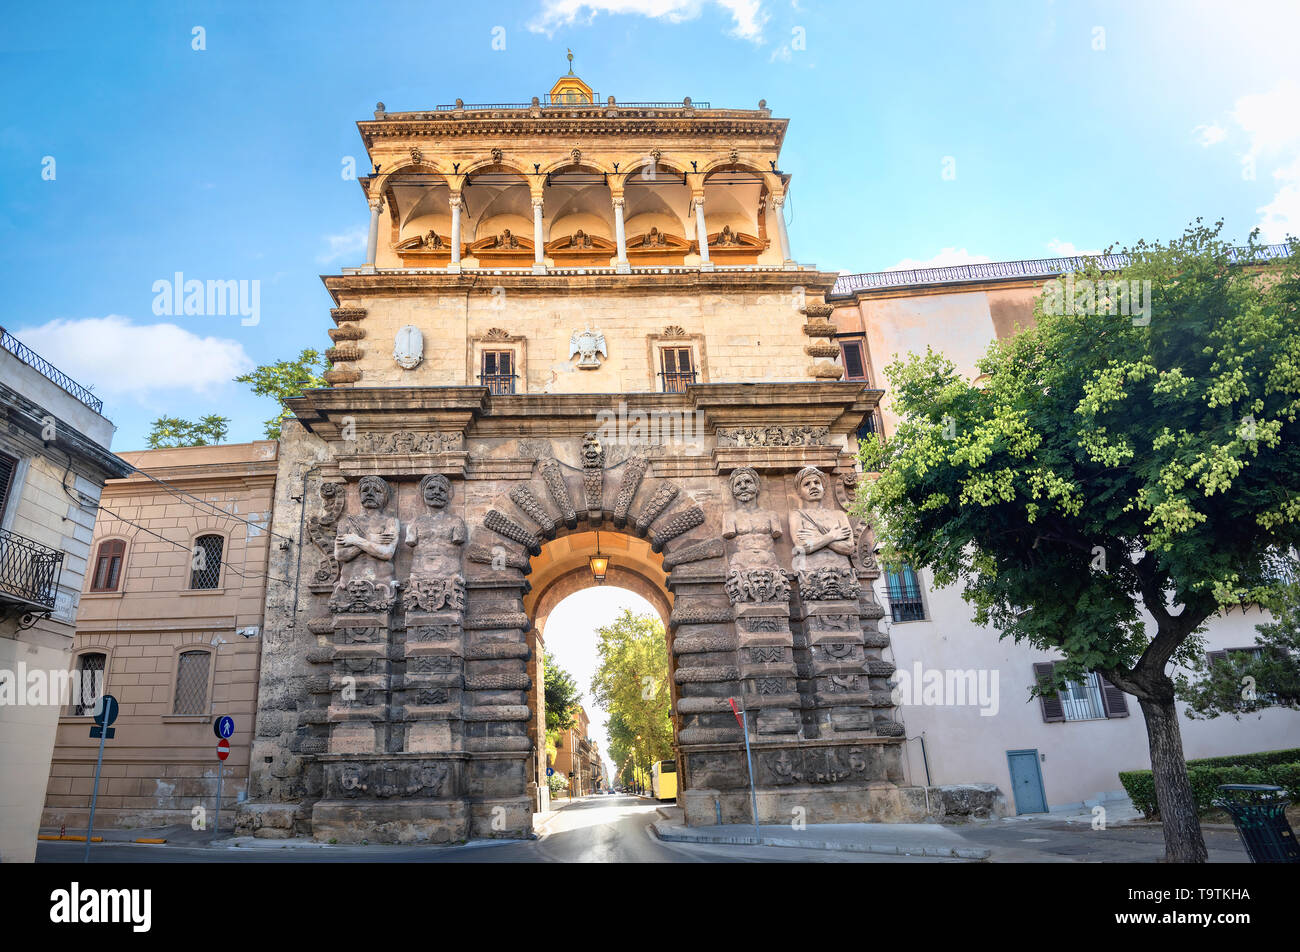 Cityscape with medieval gate Porta Nuova (New Gate) in Palermo. Sicily, Italy Stock Photo